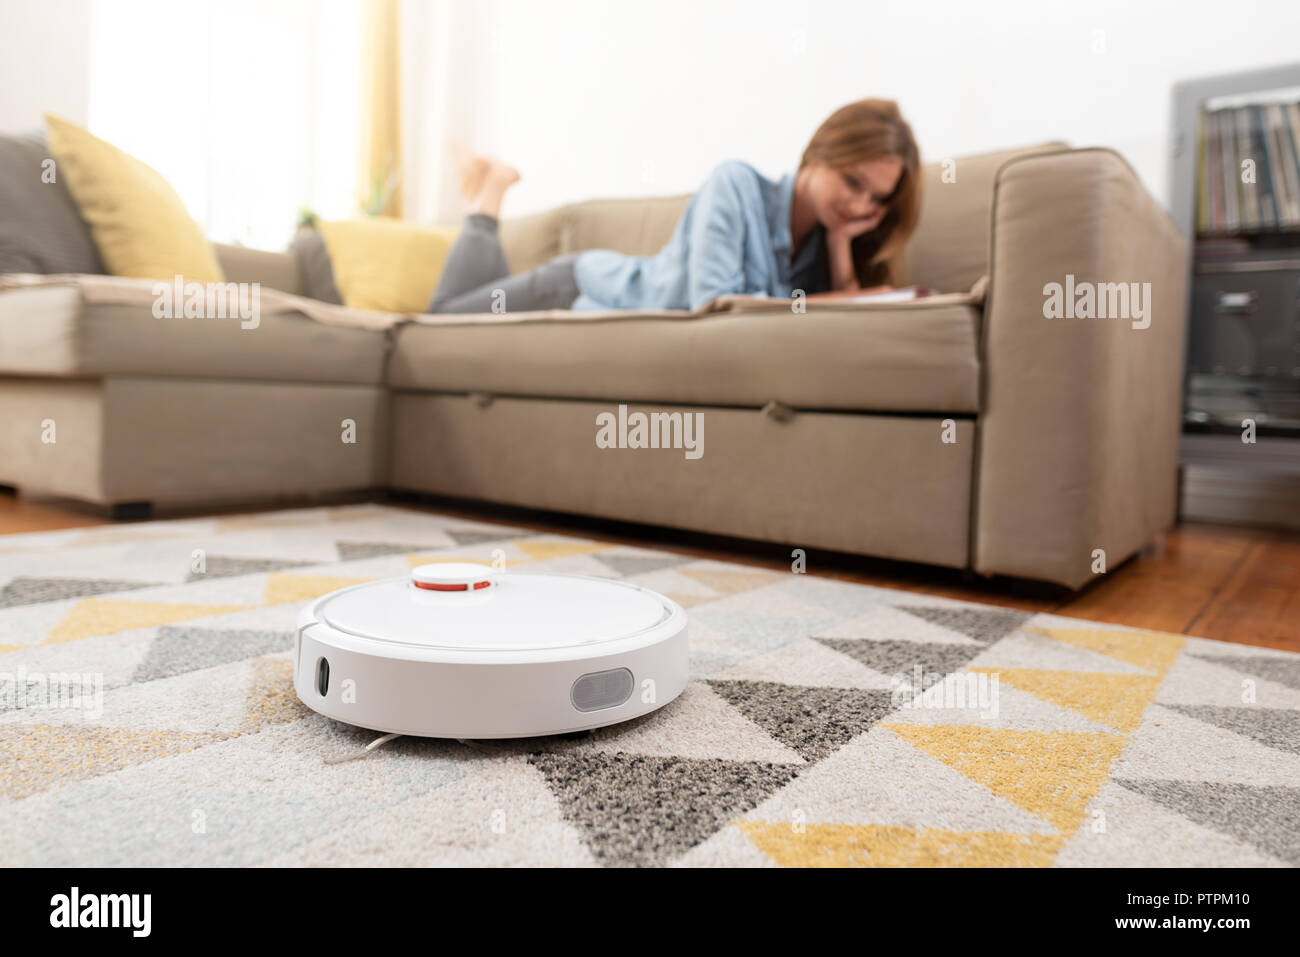 Robotic vacuum cleaner cleaning the room while woman relaxing on sofa. Woman controlling vacuum with remote control. Stock Photo